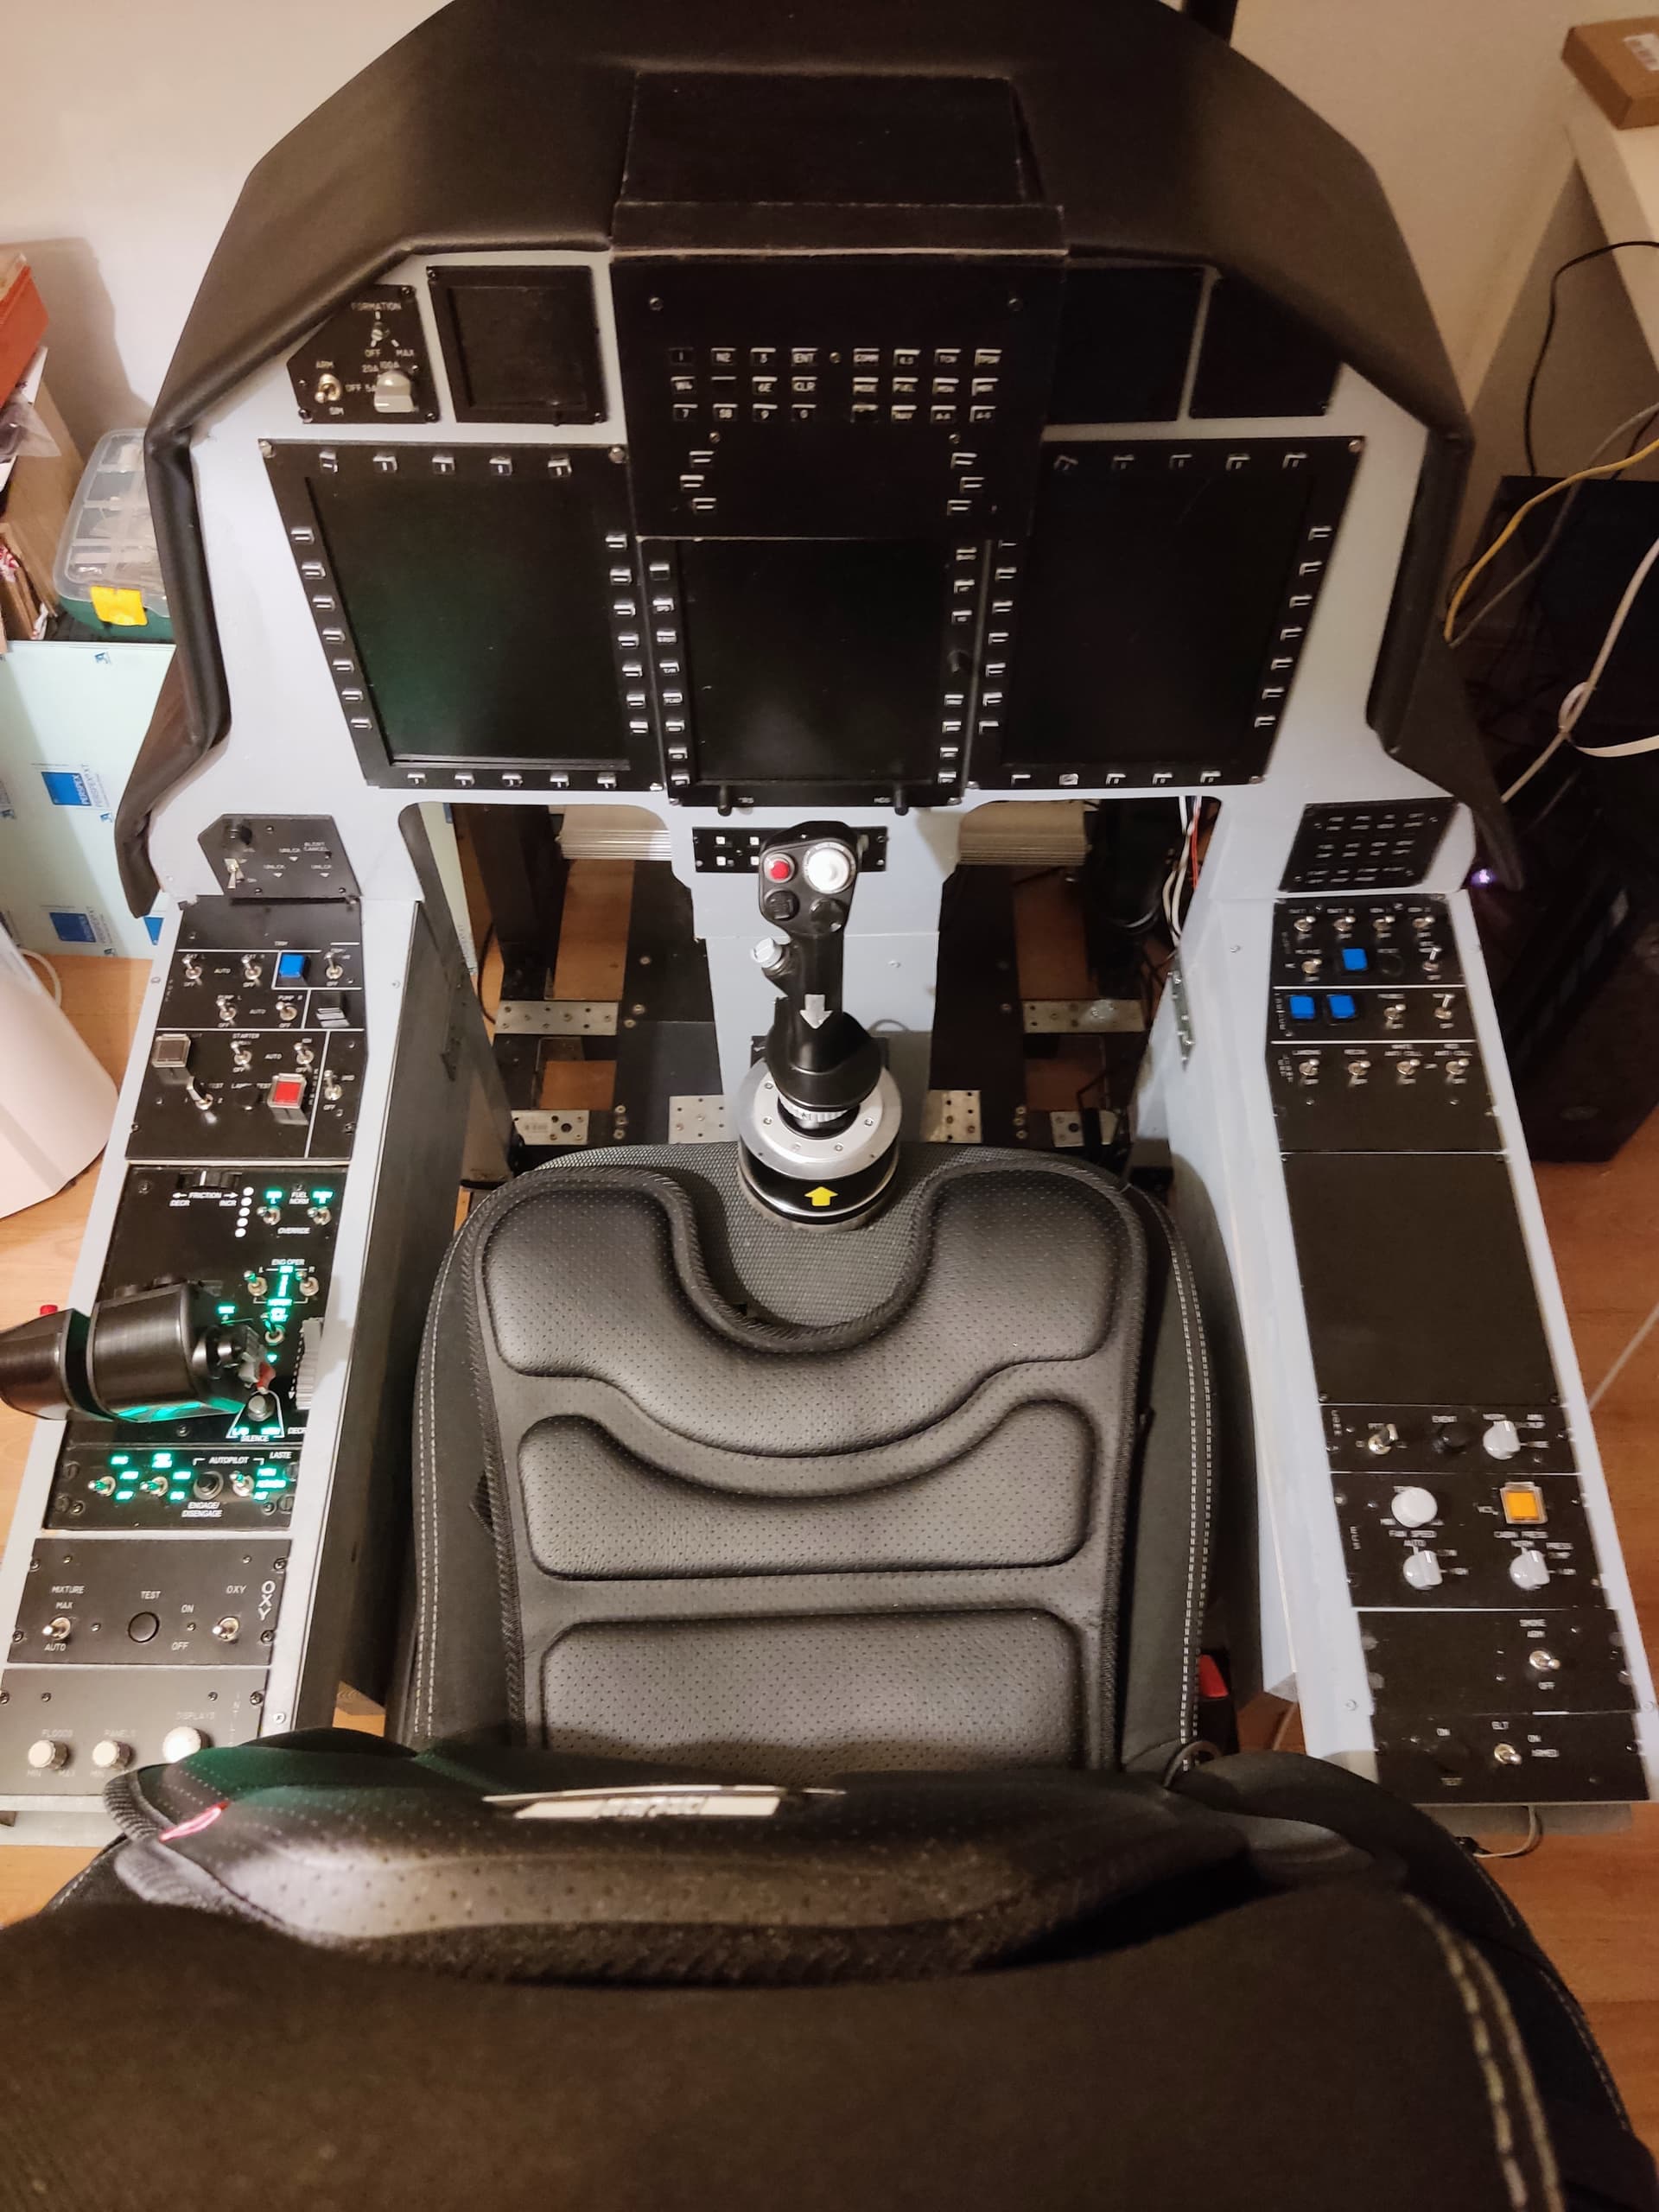 MSFS on 2 PCs - Optimal Use for Home Cockpit & Live Streaming - Home  Cockpit Builders - Microsoft Flight Simulator Forums